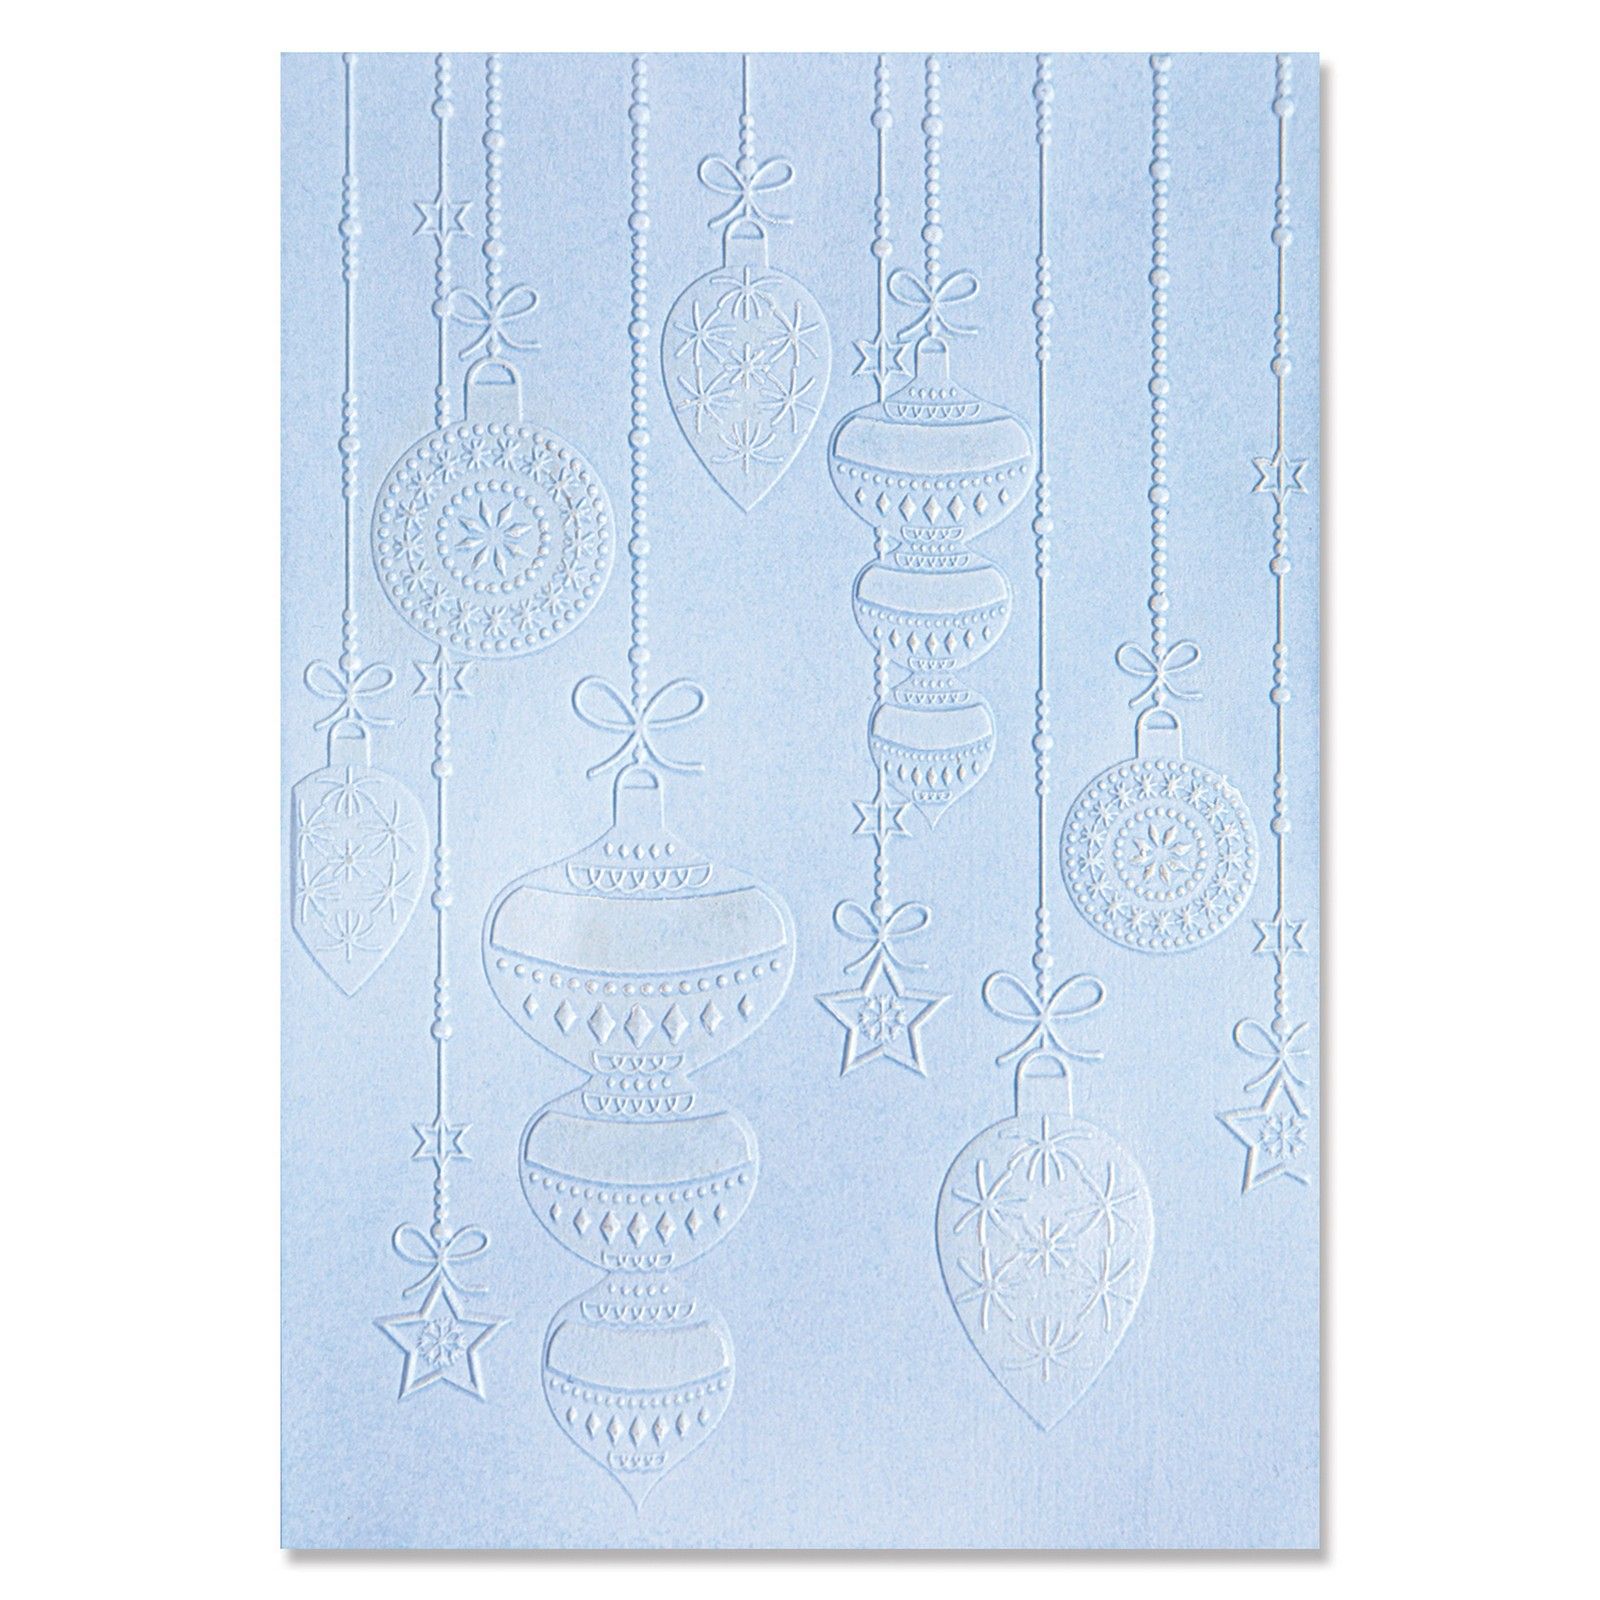 Sizzix Textured Impressions Embossing Folders 2PK - Country